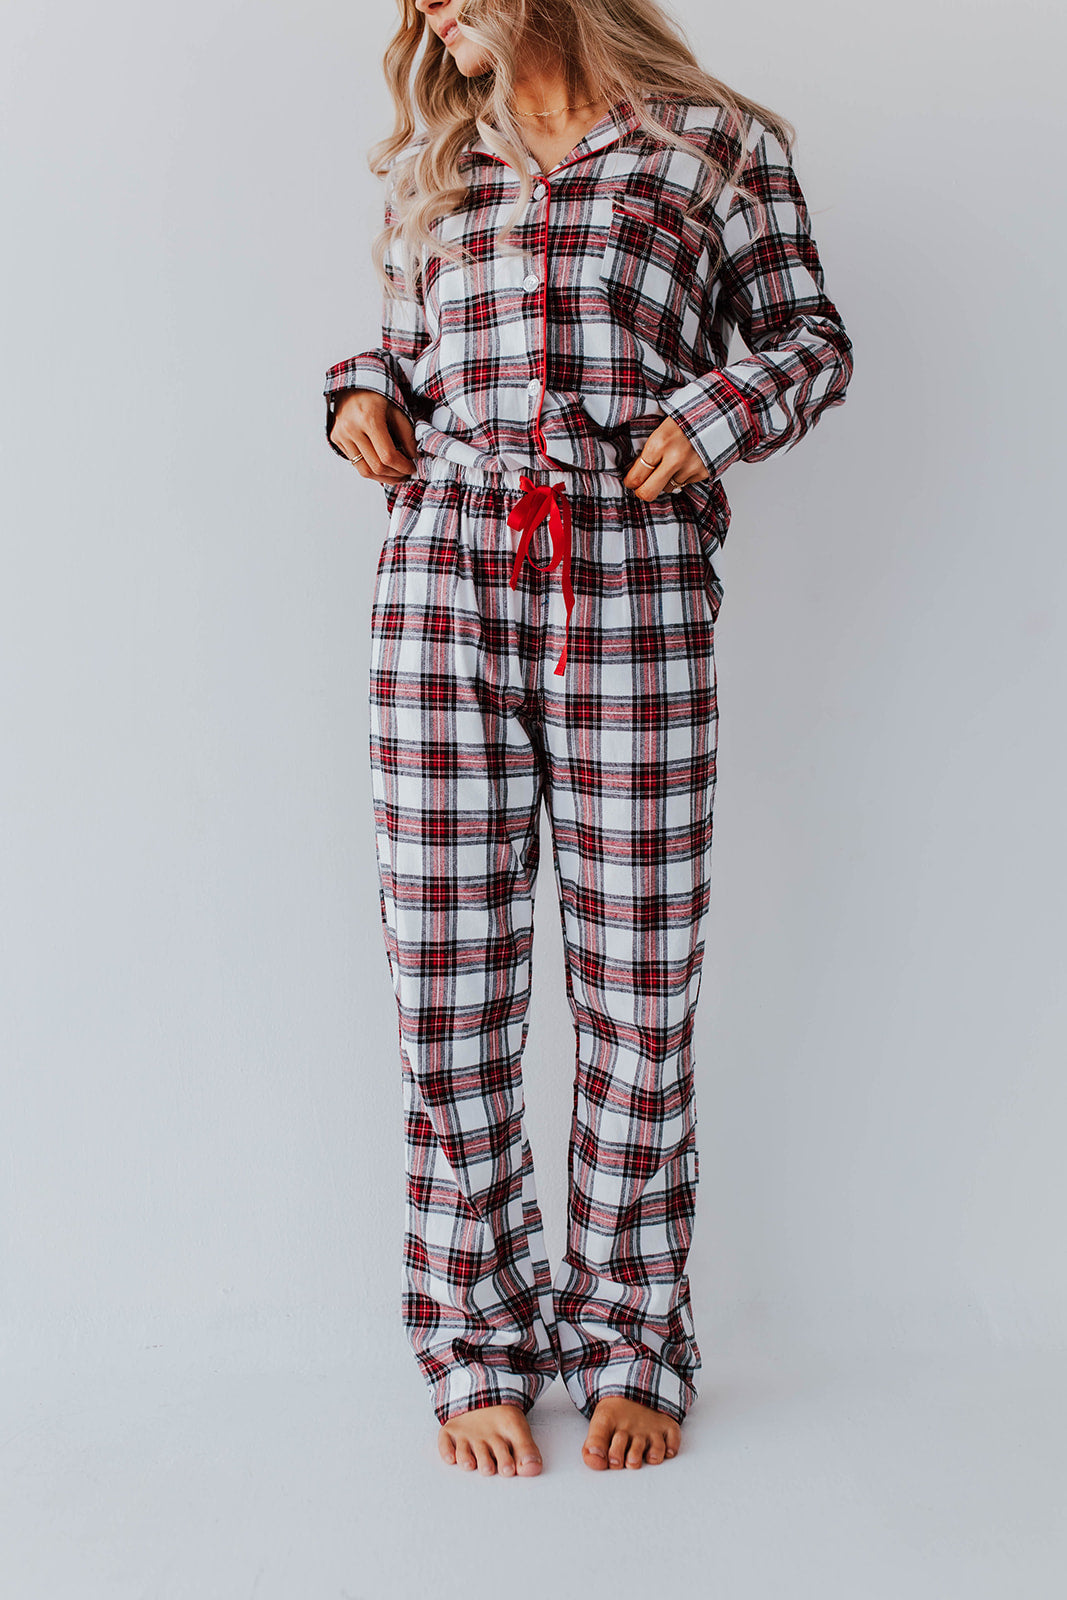 THE FIRESIDE Pink Desert – IN RED PLAID PAJAMAS FLANNEL